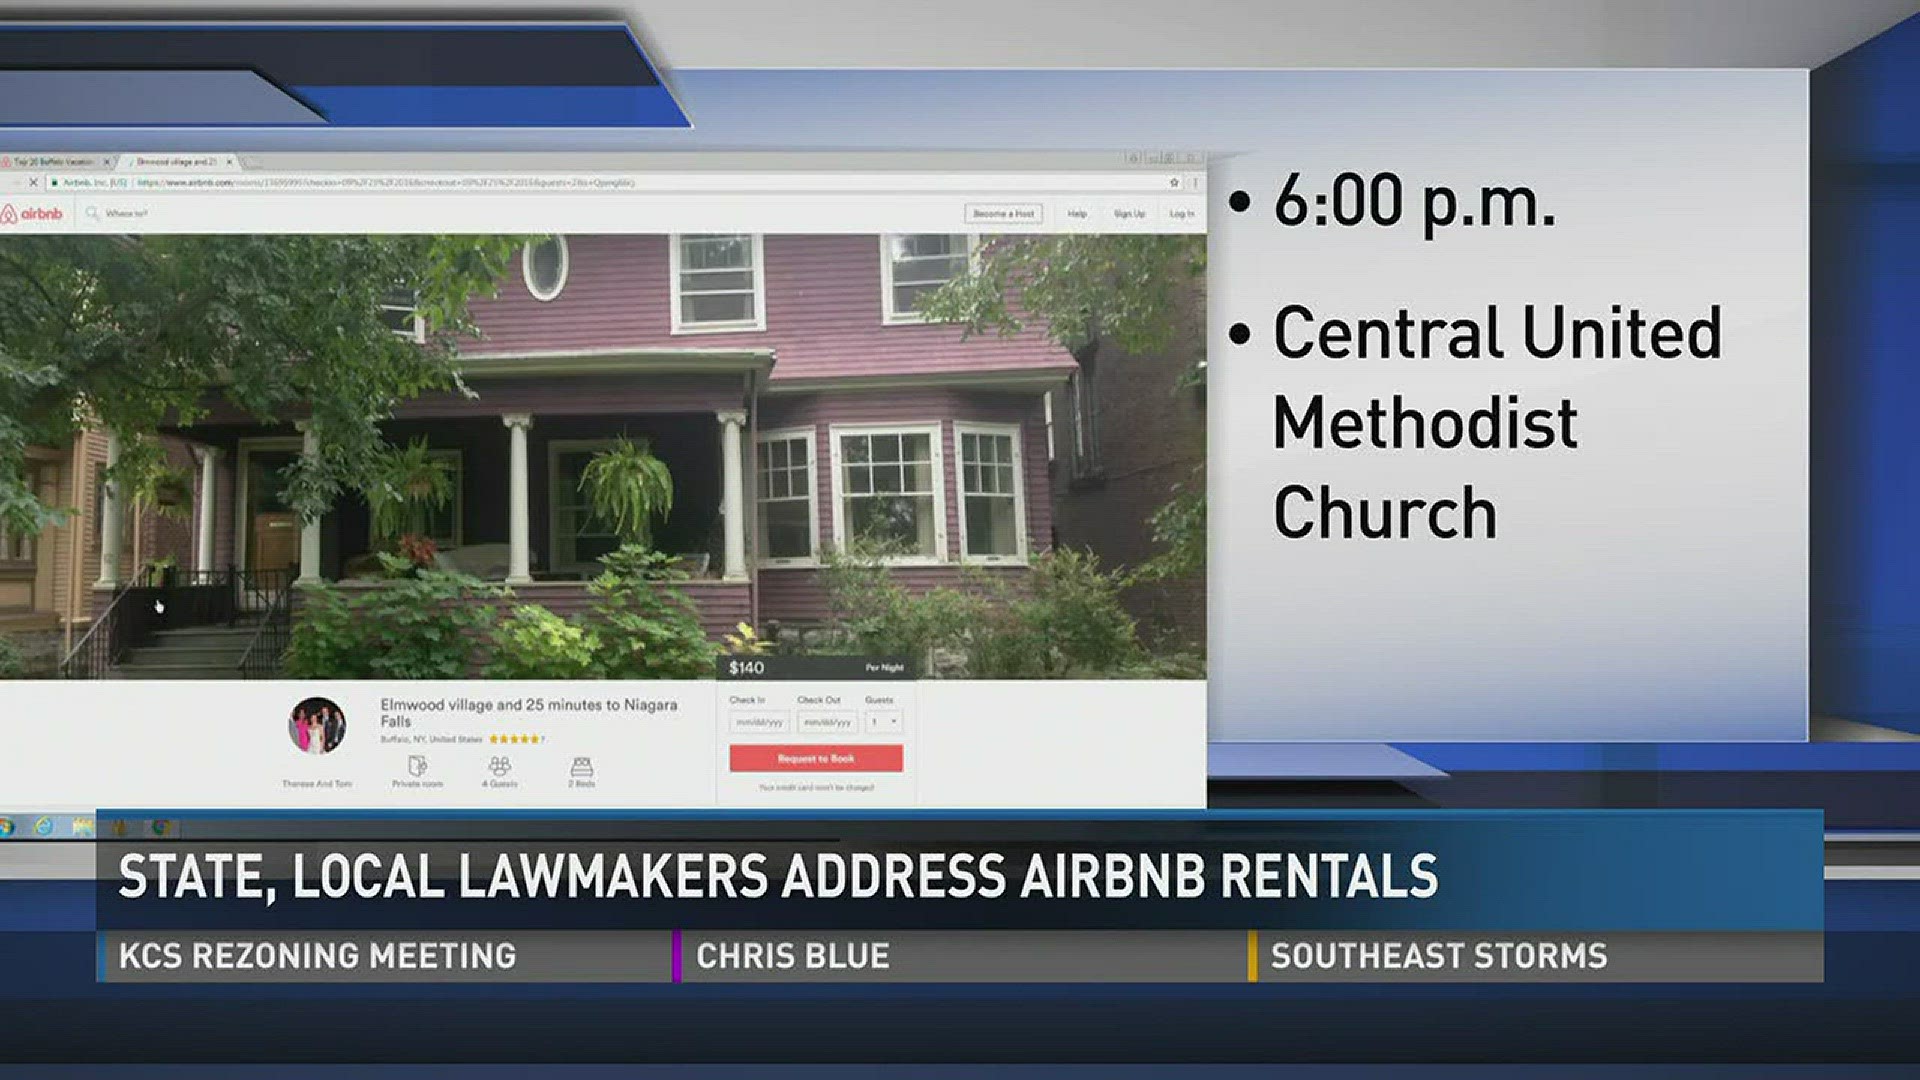 The City of Knoxville is asking for feedback on regulating short-term rental properties like Airbnb.